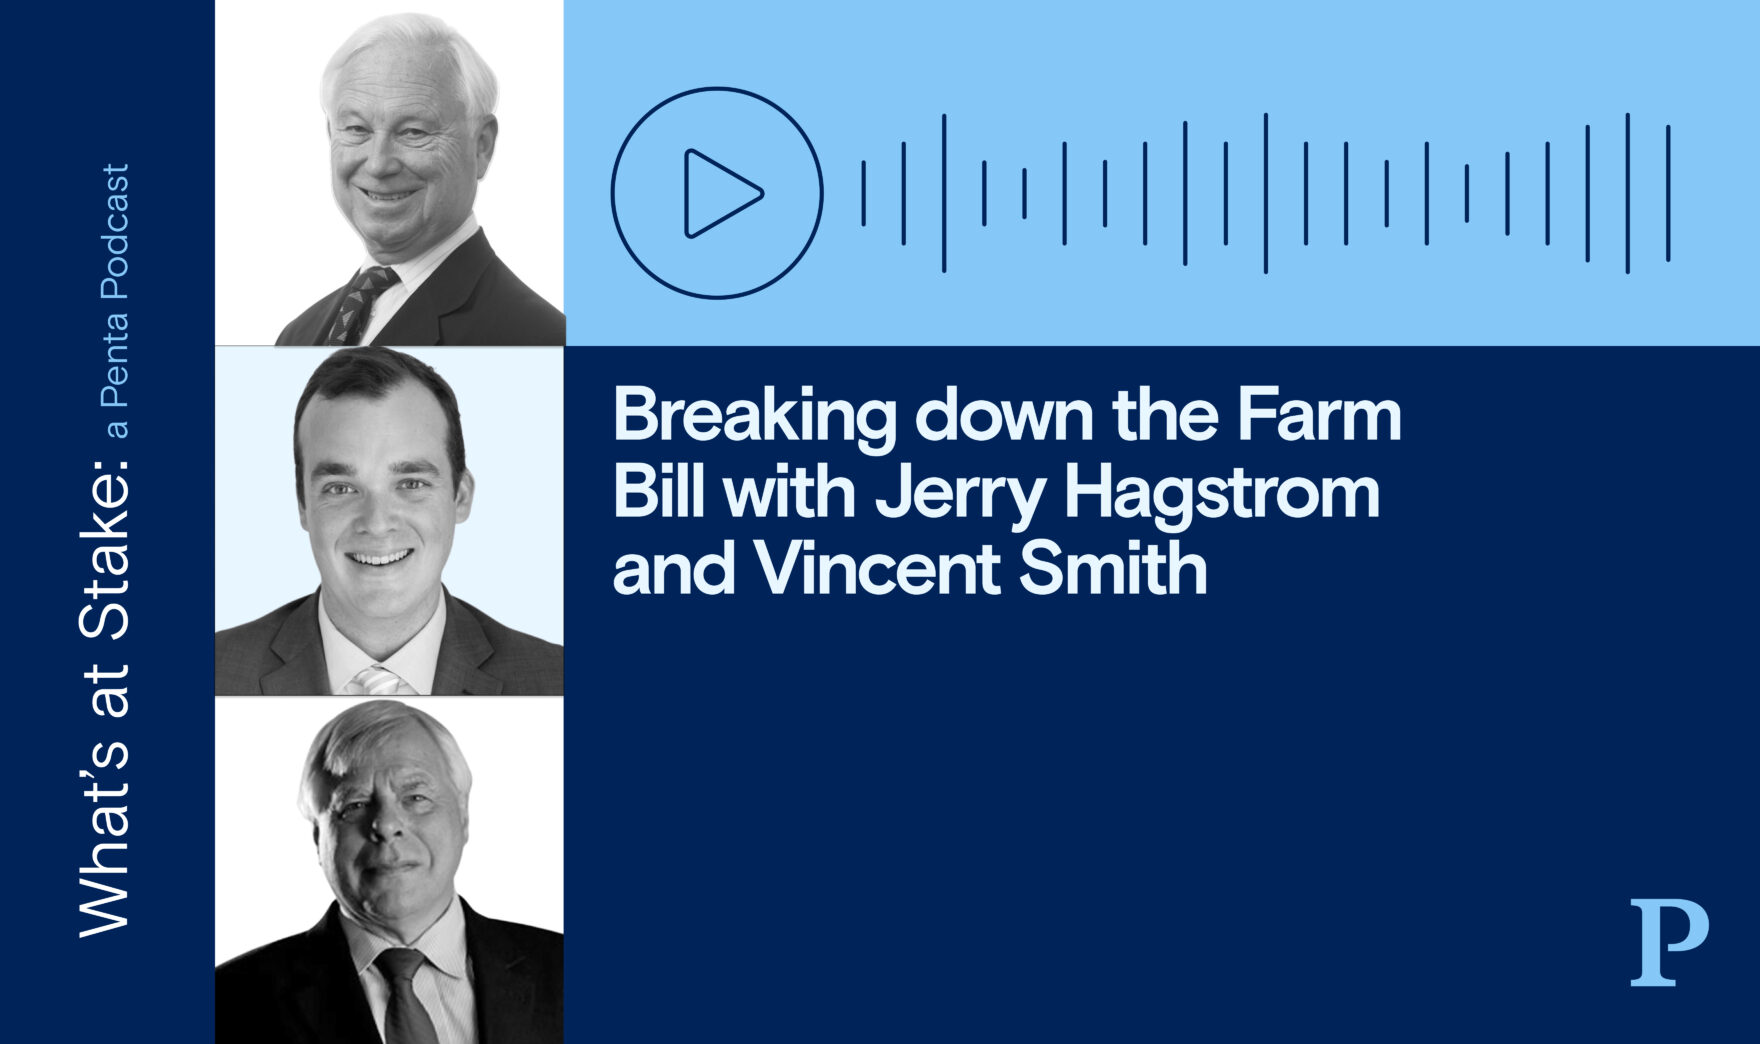 Breaking down the Farm Bill with Jerry Hagstrom and Vincent Smith